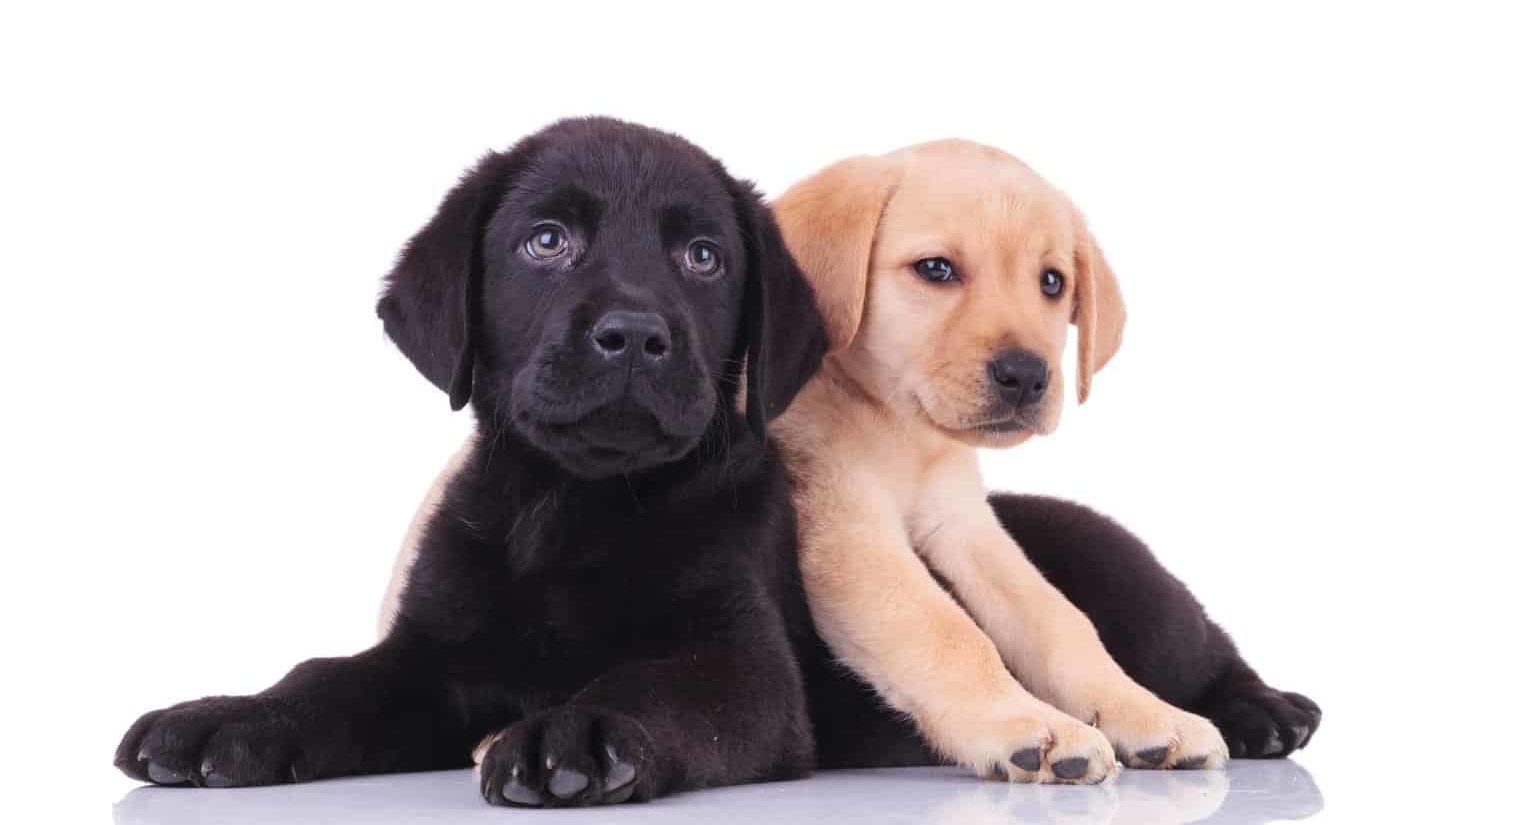 Black Labrador and Yellow Labrador puppies on white background. Use our list of dos and don'ts to protect your puppy from health scares to ensure your dog lives a long, healthy life.